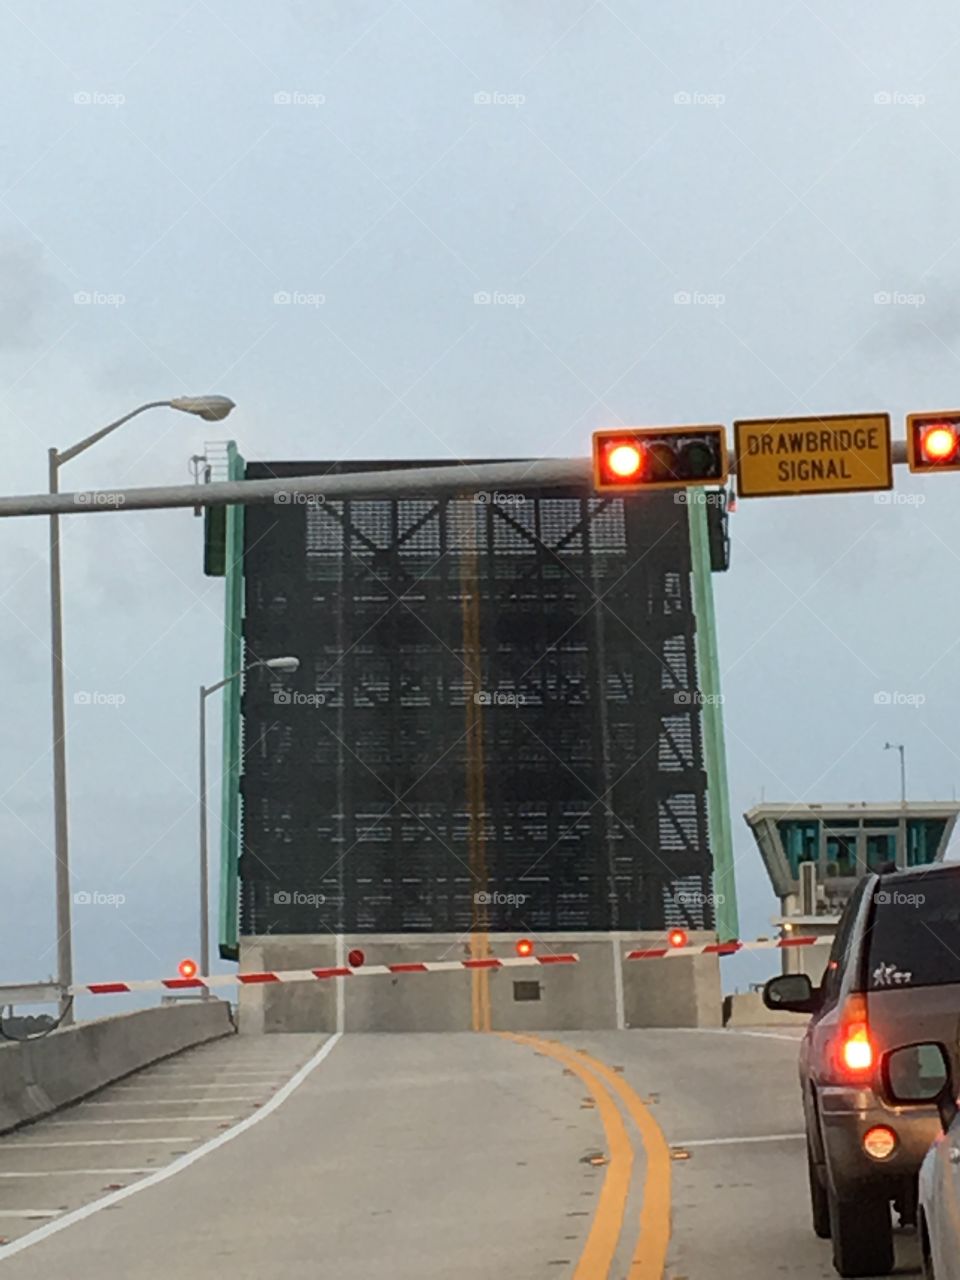 Funny how a simple drawbridge can put a smile on a child's face, just by them listening to the signal and the toot of the boats horn. 